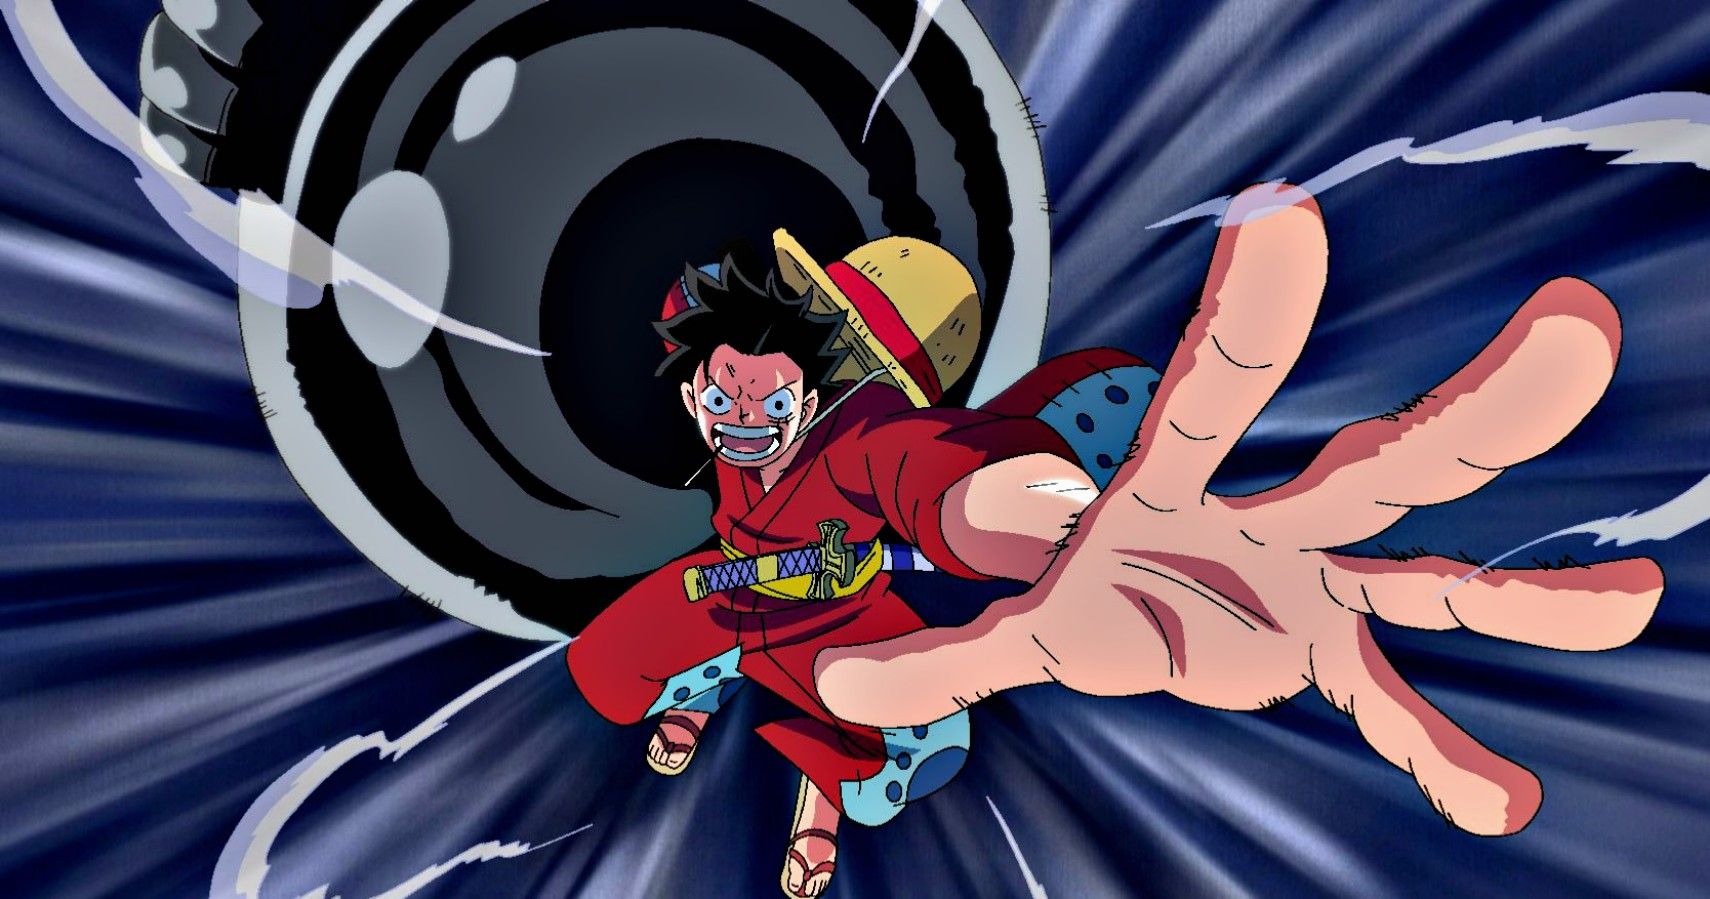 Luffy: Everything about 5 Luffy's Gear